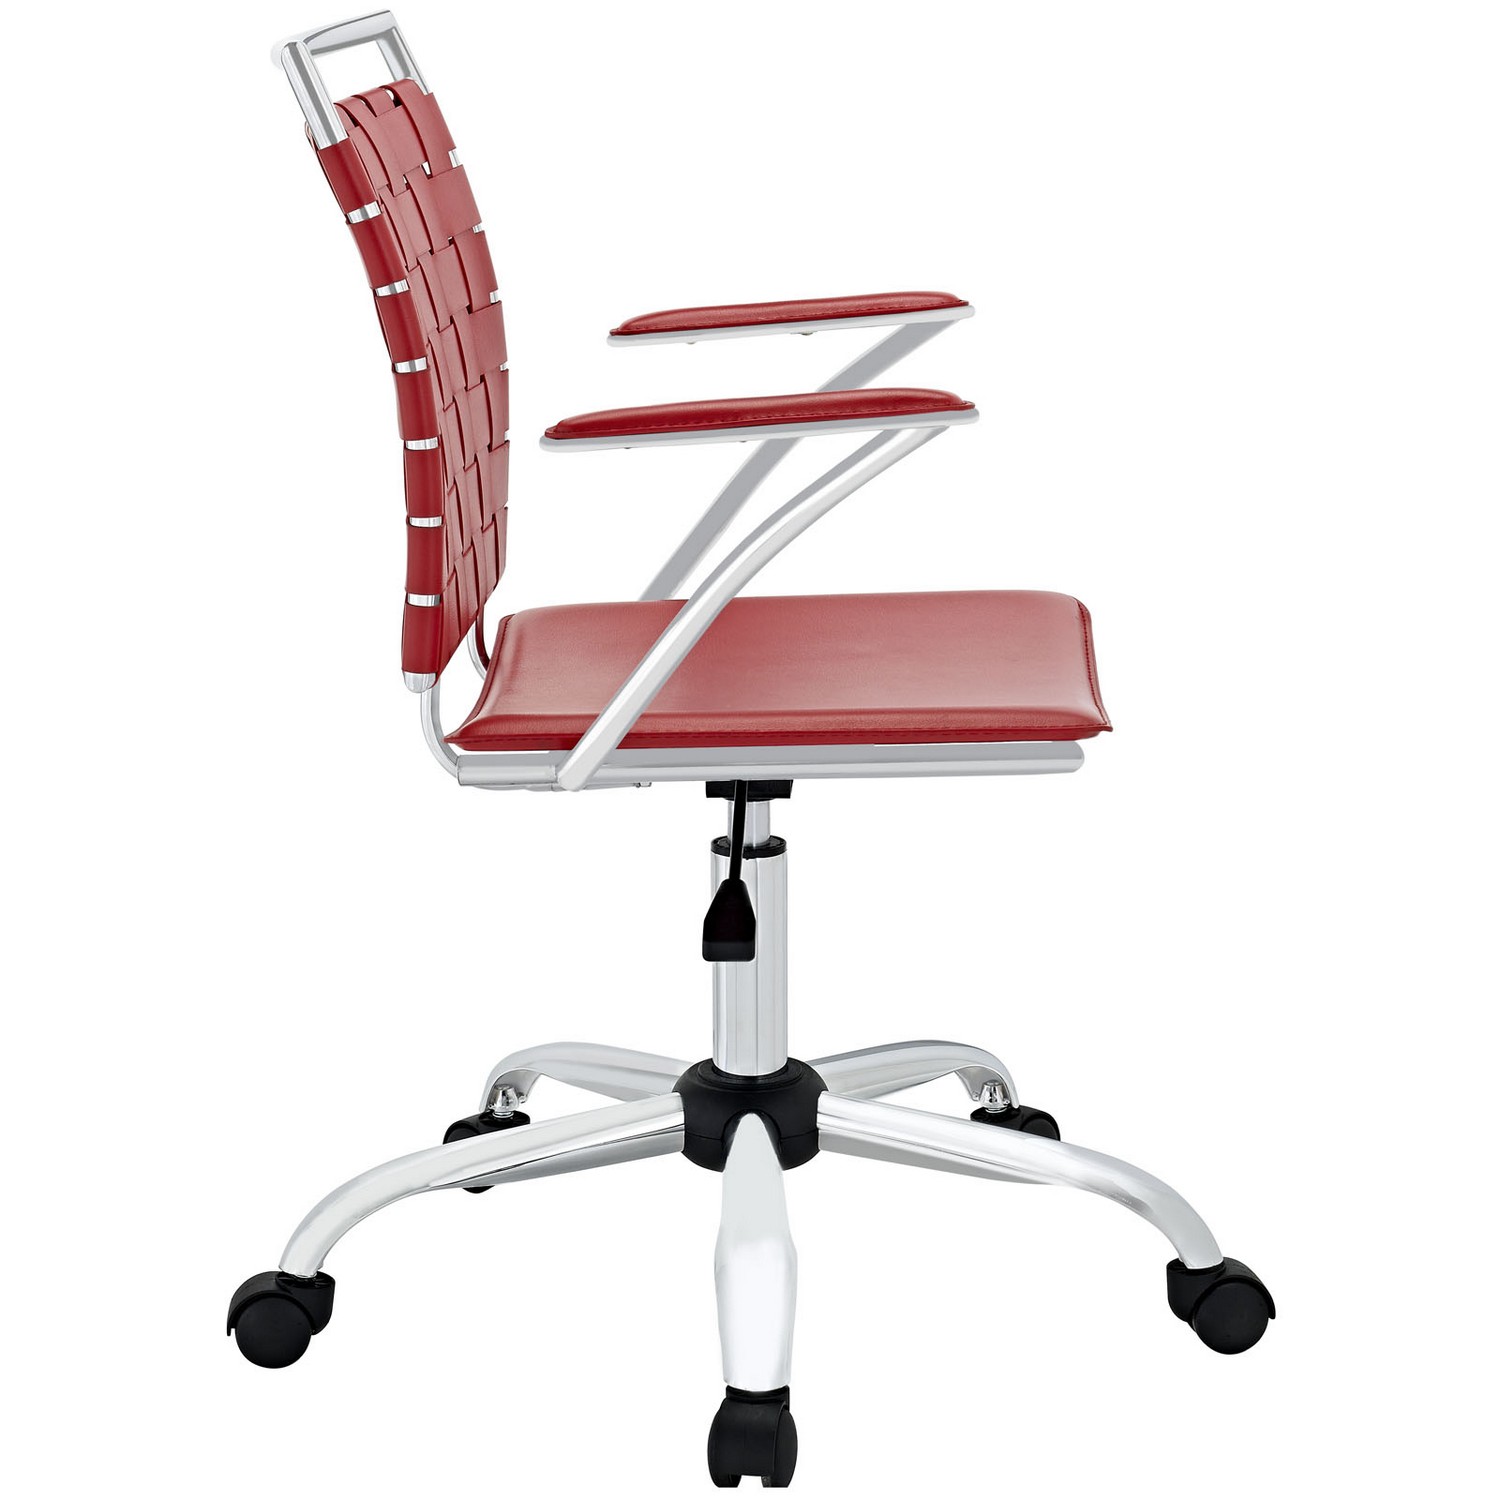 Modway Fuse Office Chair - Red